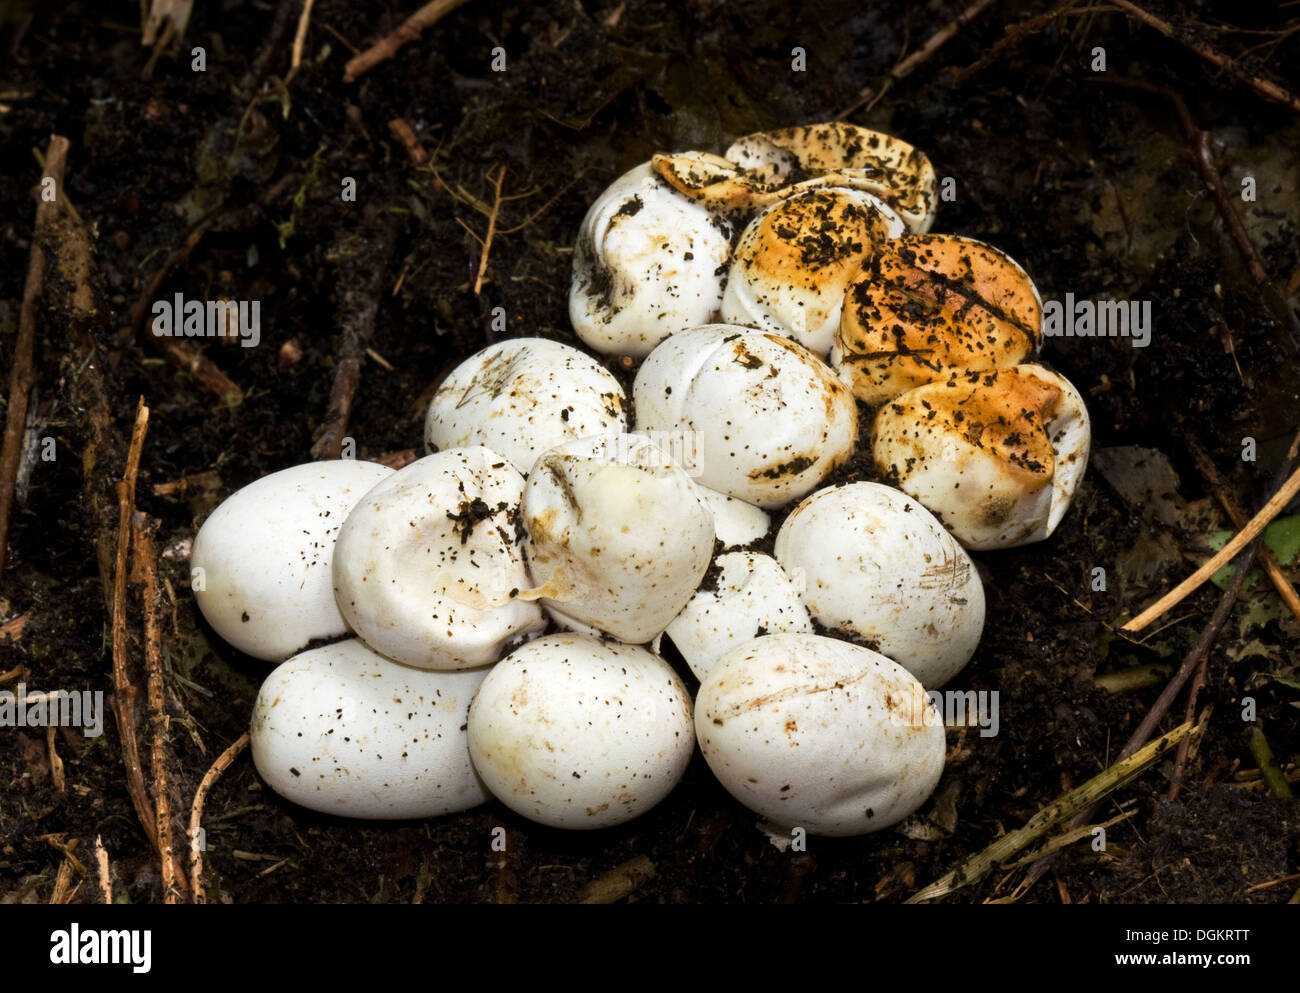 Eggs of a Grass snake in a compost heap Stock Photo